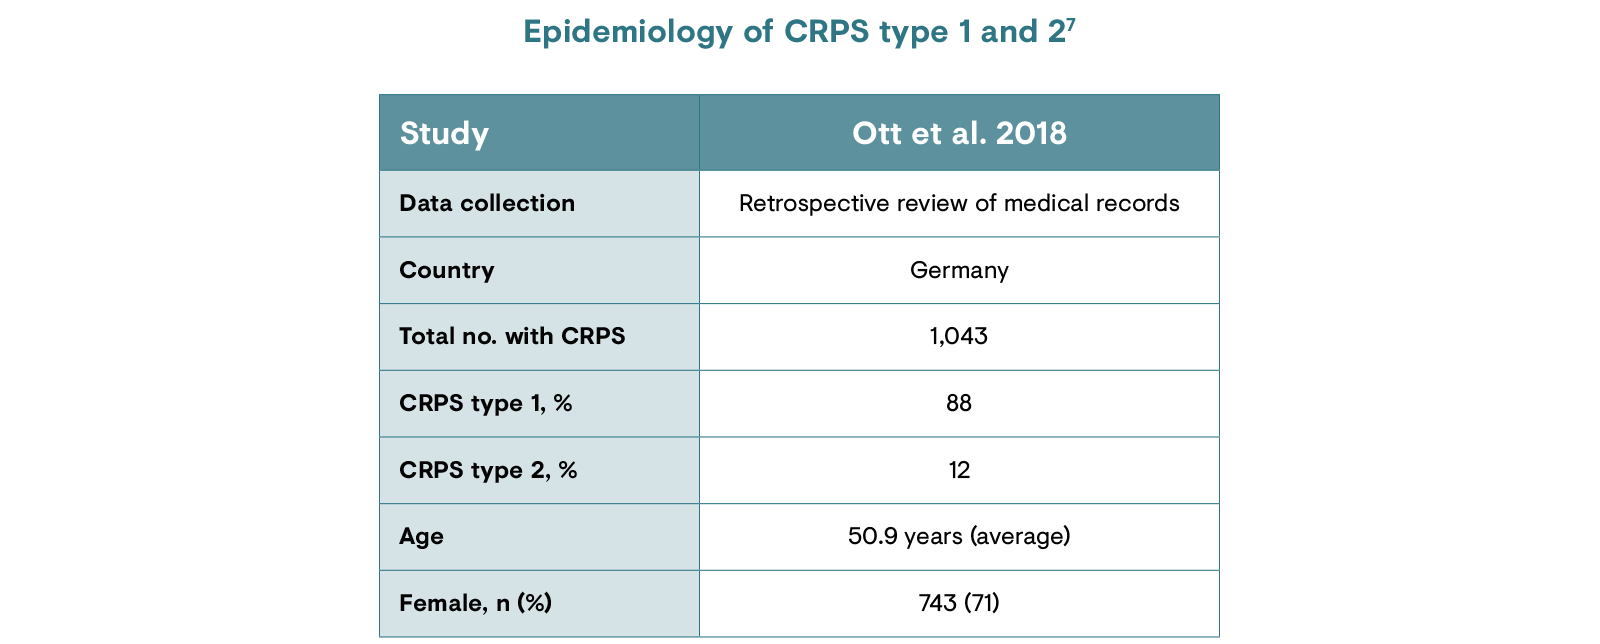 Epidemiology of CRPS type 1 and 2